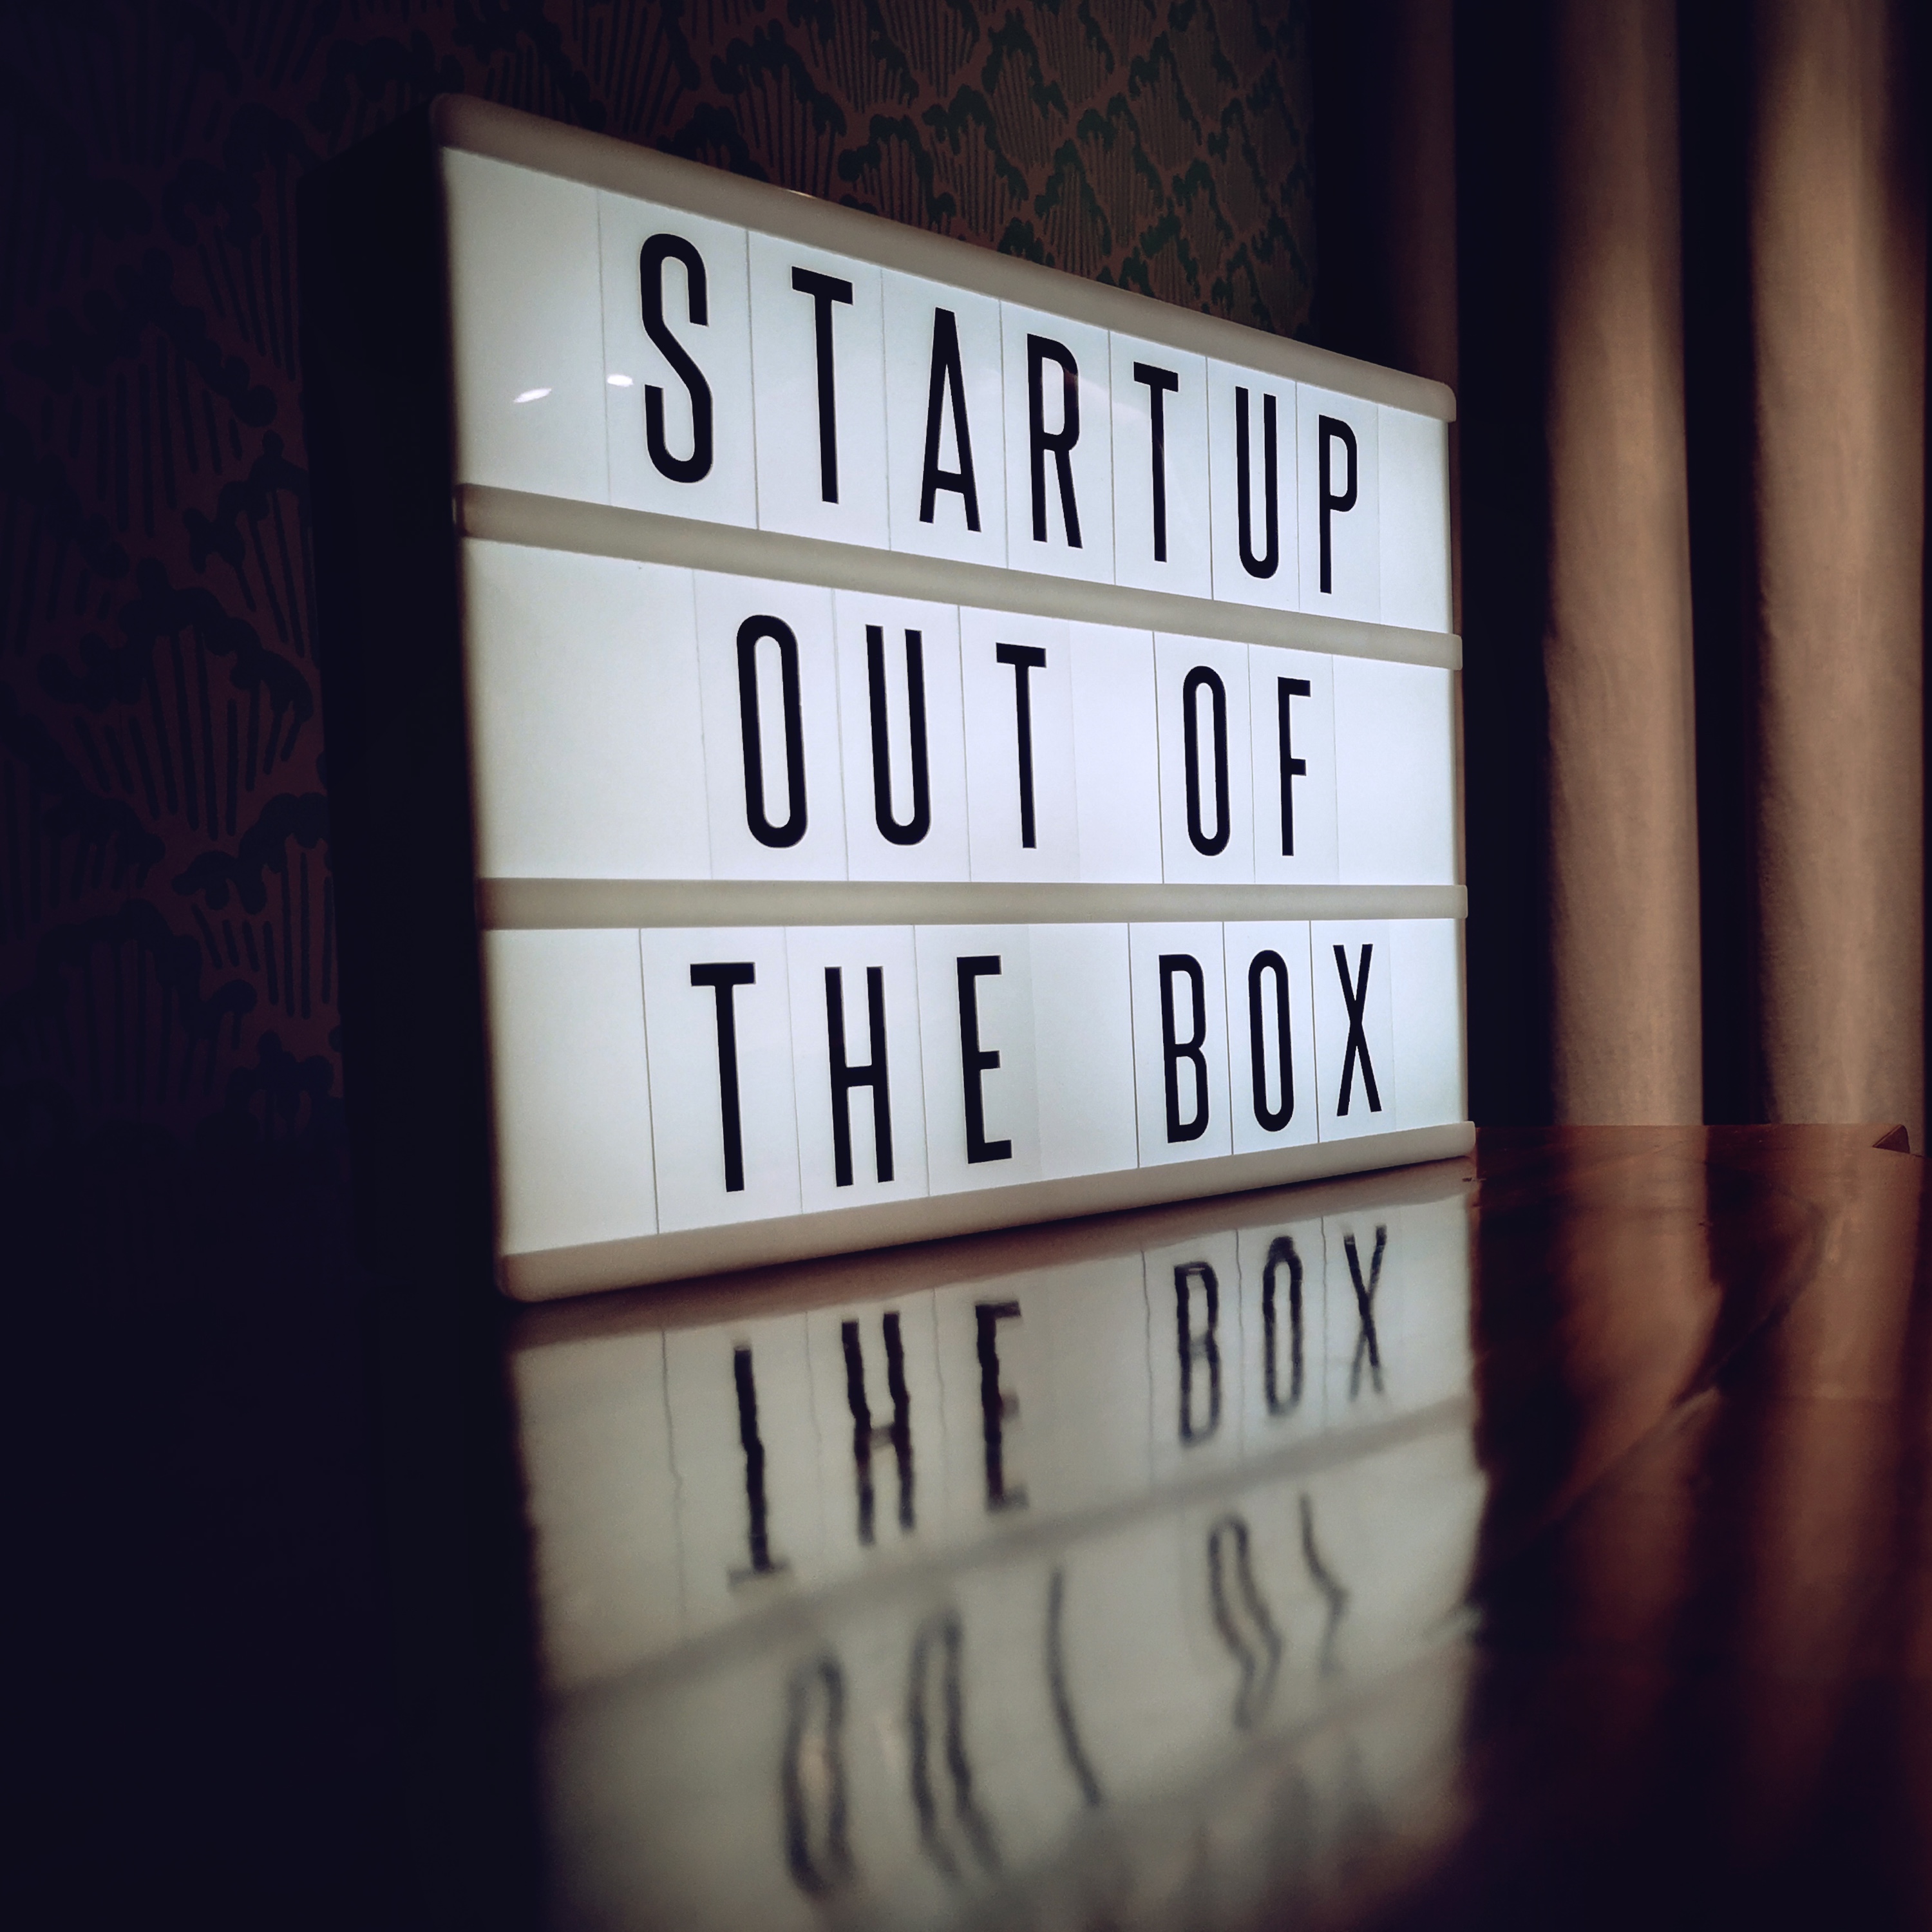 Startup out of the box